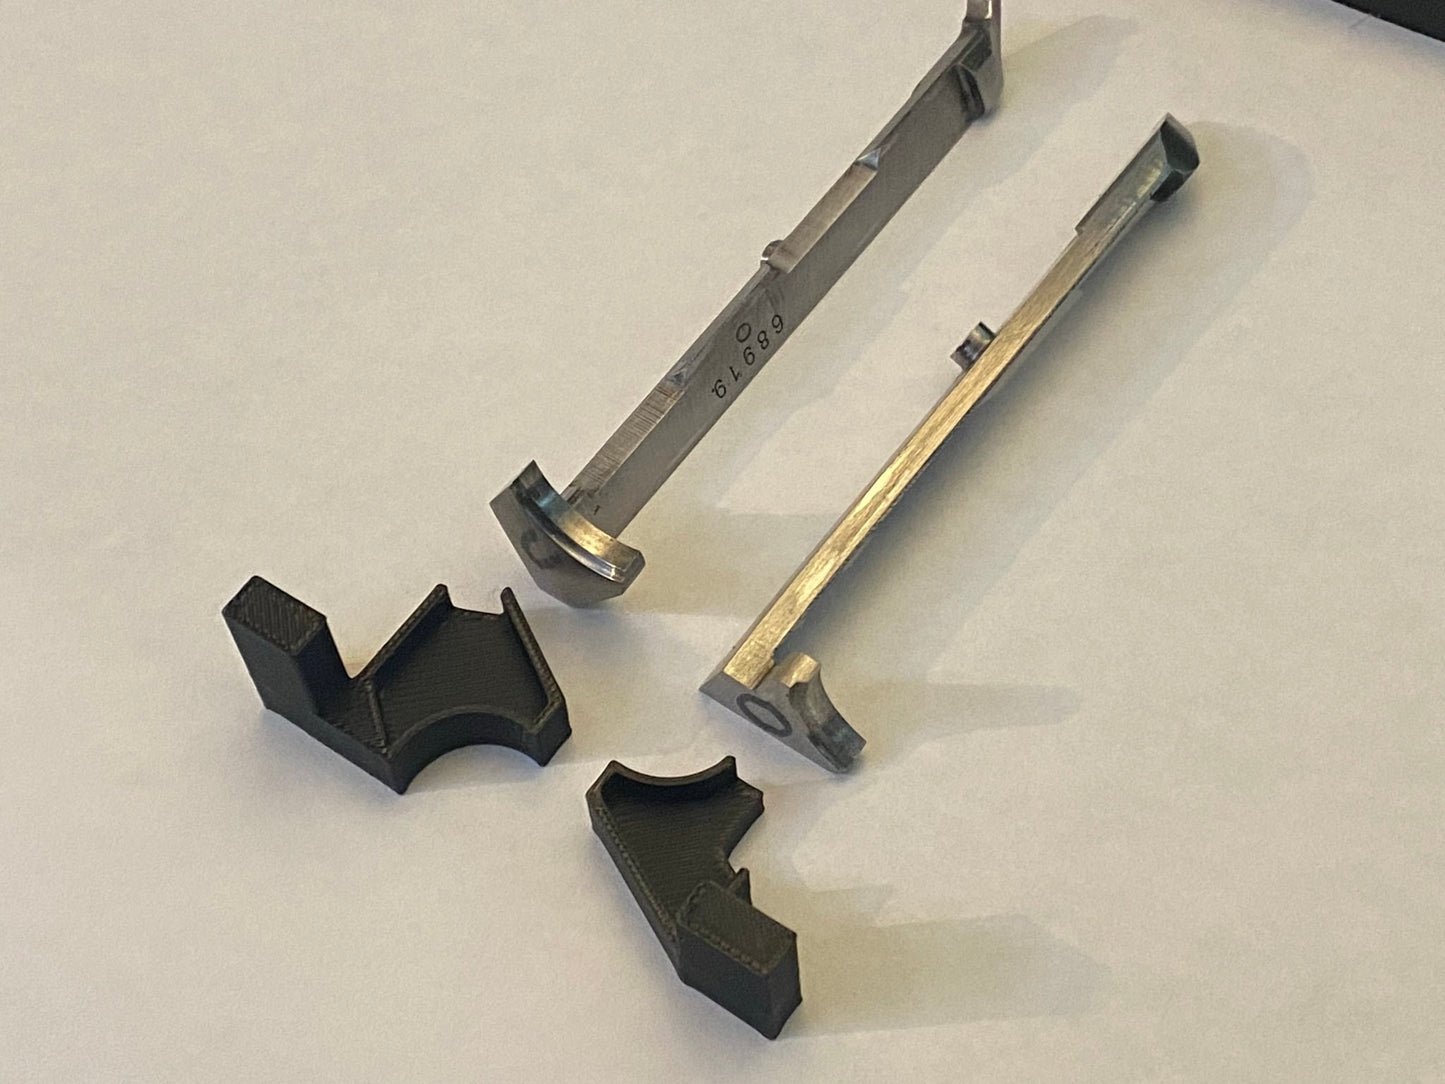 Ejector Removal Tool for Beretta 68x, DT-10, DT-11